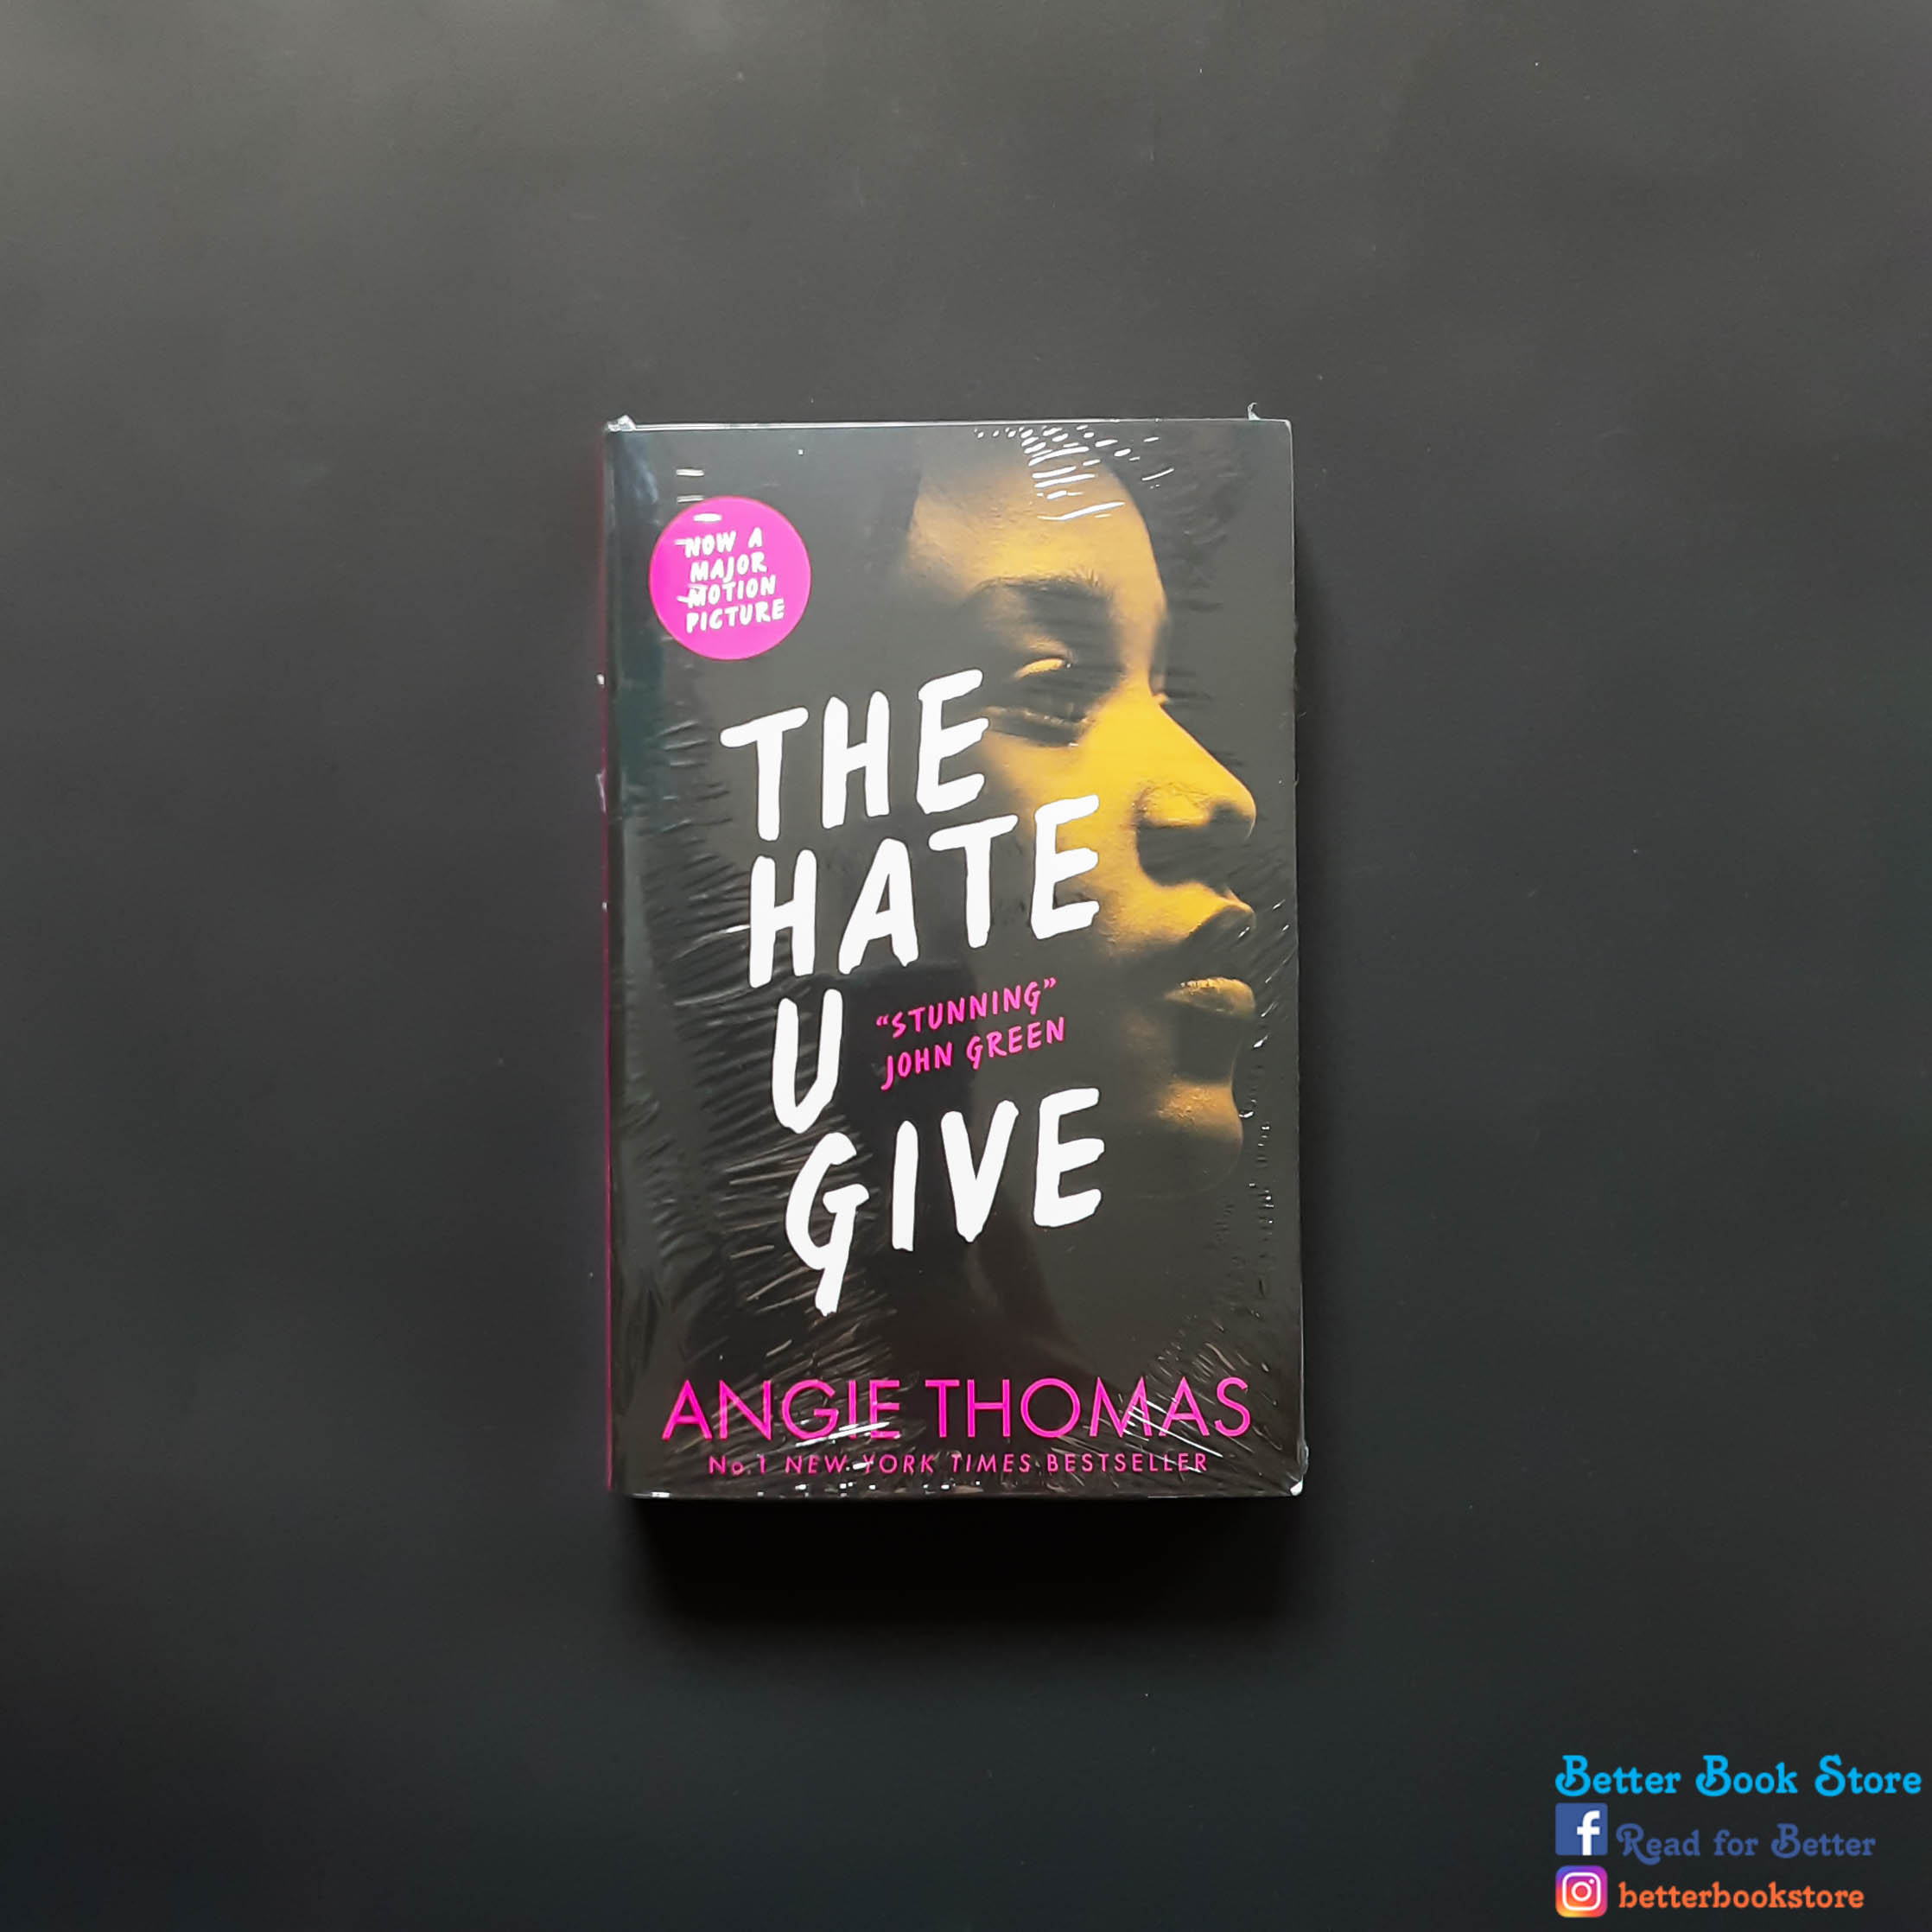 The Hate U Give 🏴 by Angie Thomas